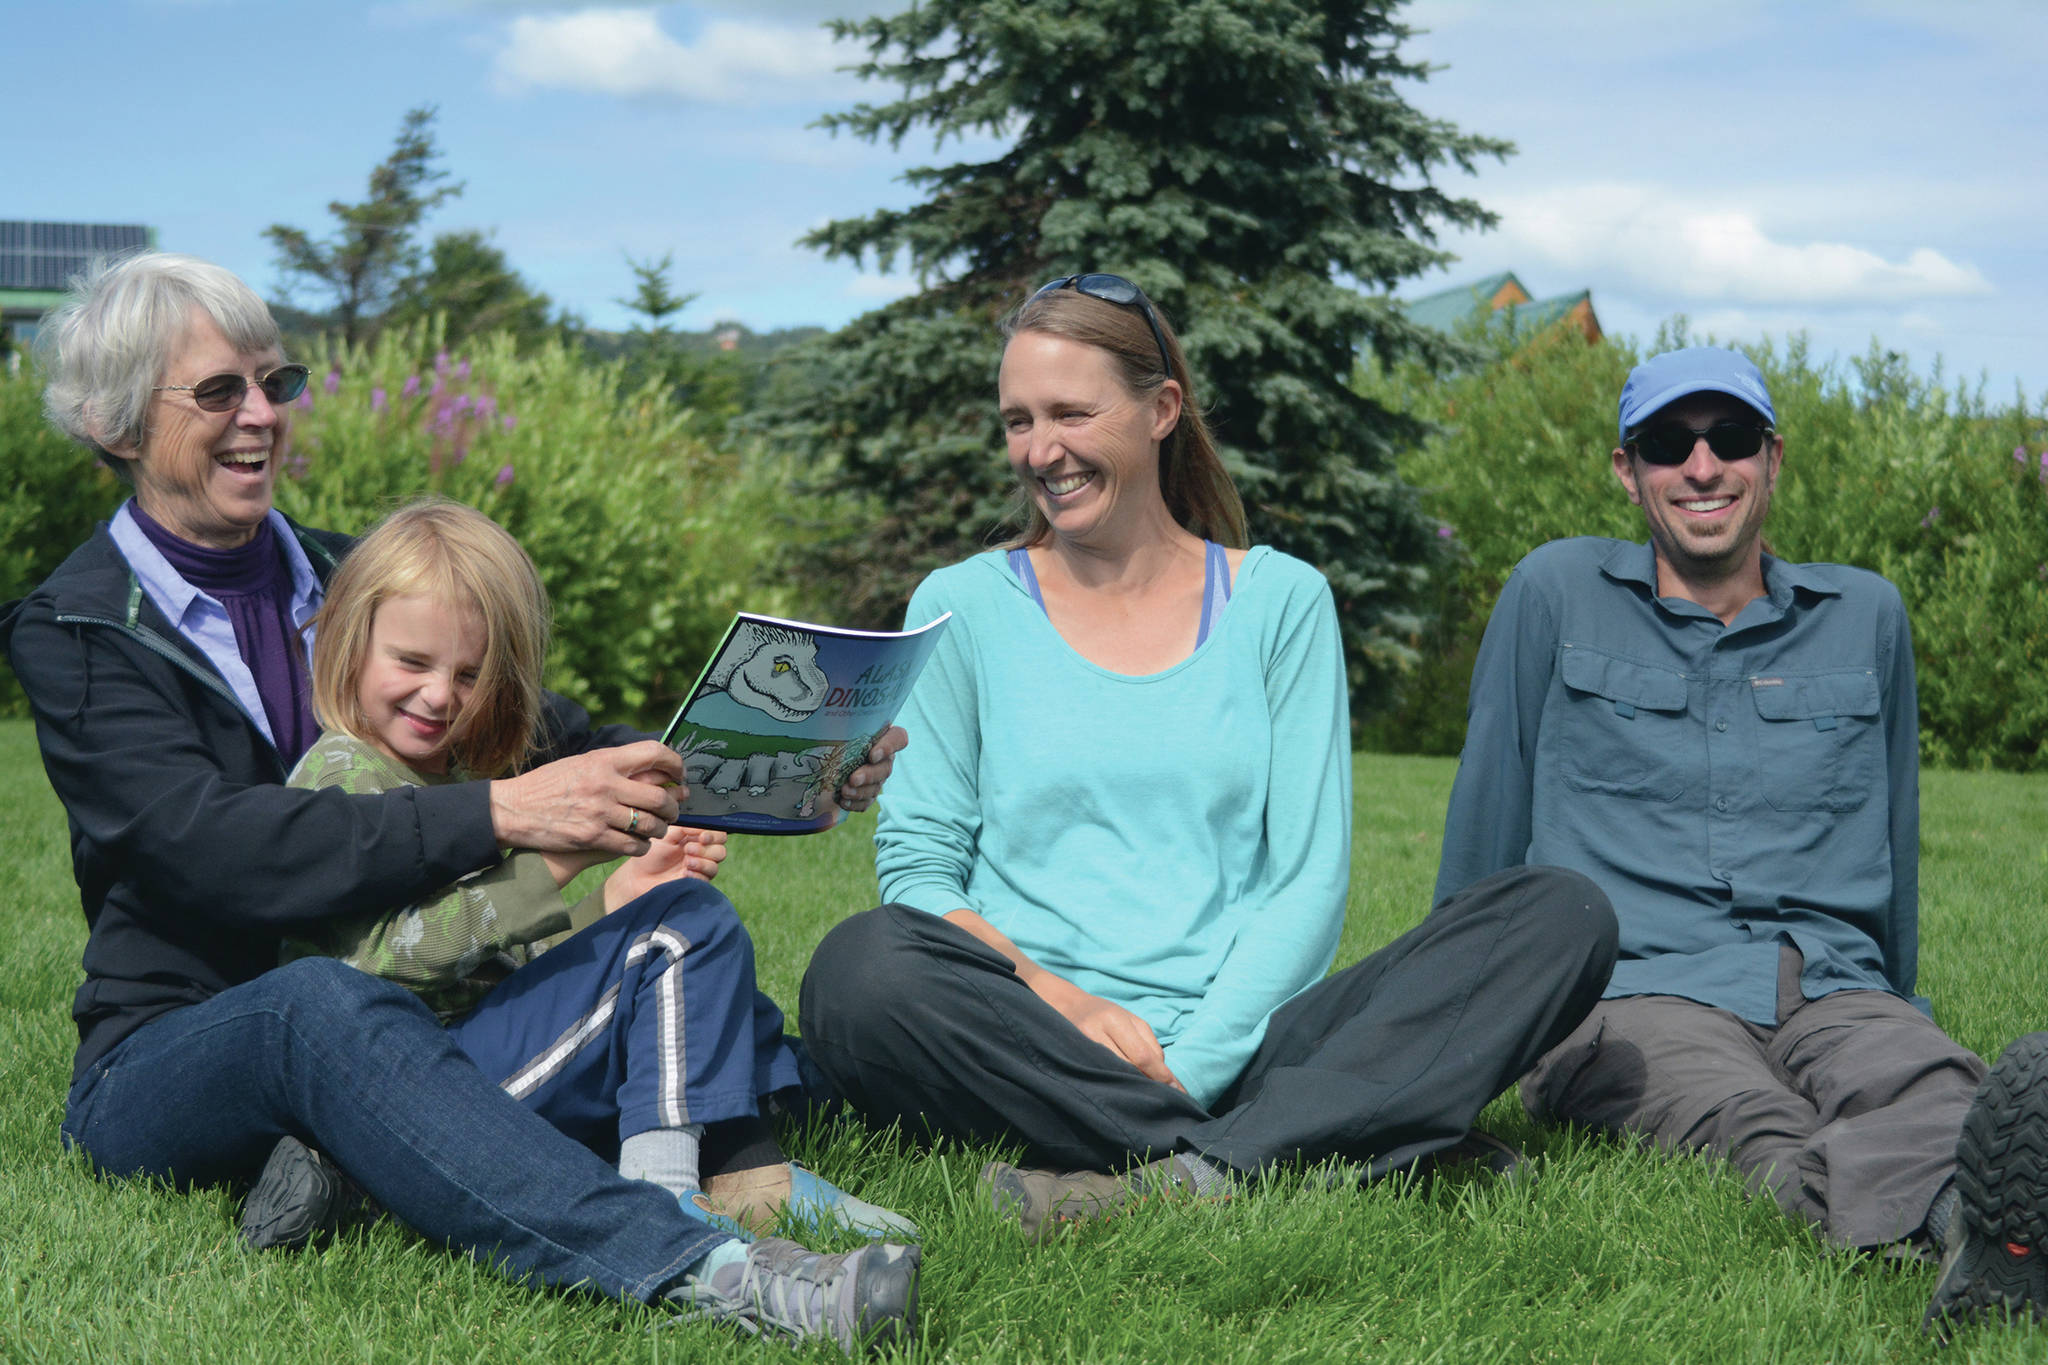 Janet R. Klein, left, holds her grandson, Sylas Reising, 4, while she visits with her daughter, Deborah Klein, center, and son-in-law George Reising, right, at Bishop’s Beach, Homer, Alaska, on Aug. 9, 2018. Janet Klein will receive the Lifelong Learner award in a ceremony on March 21, 2020, at the Homer Public Library. The Kleins wrote a “color and learn” book, “Alaska’s Dinosaurs and Other Cretaceous Creatures.” Sylas and Kai Reising, 6 (not shown) Sylas and Kai were the inspiration for the Kleins’ book. (Photo by Michael Armstrong/Homer News)